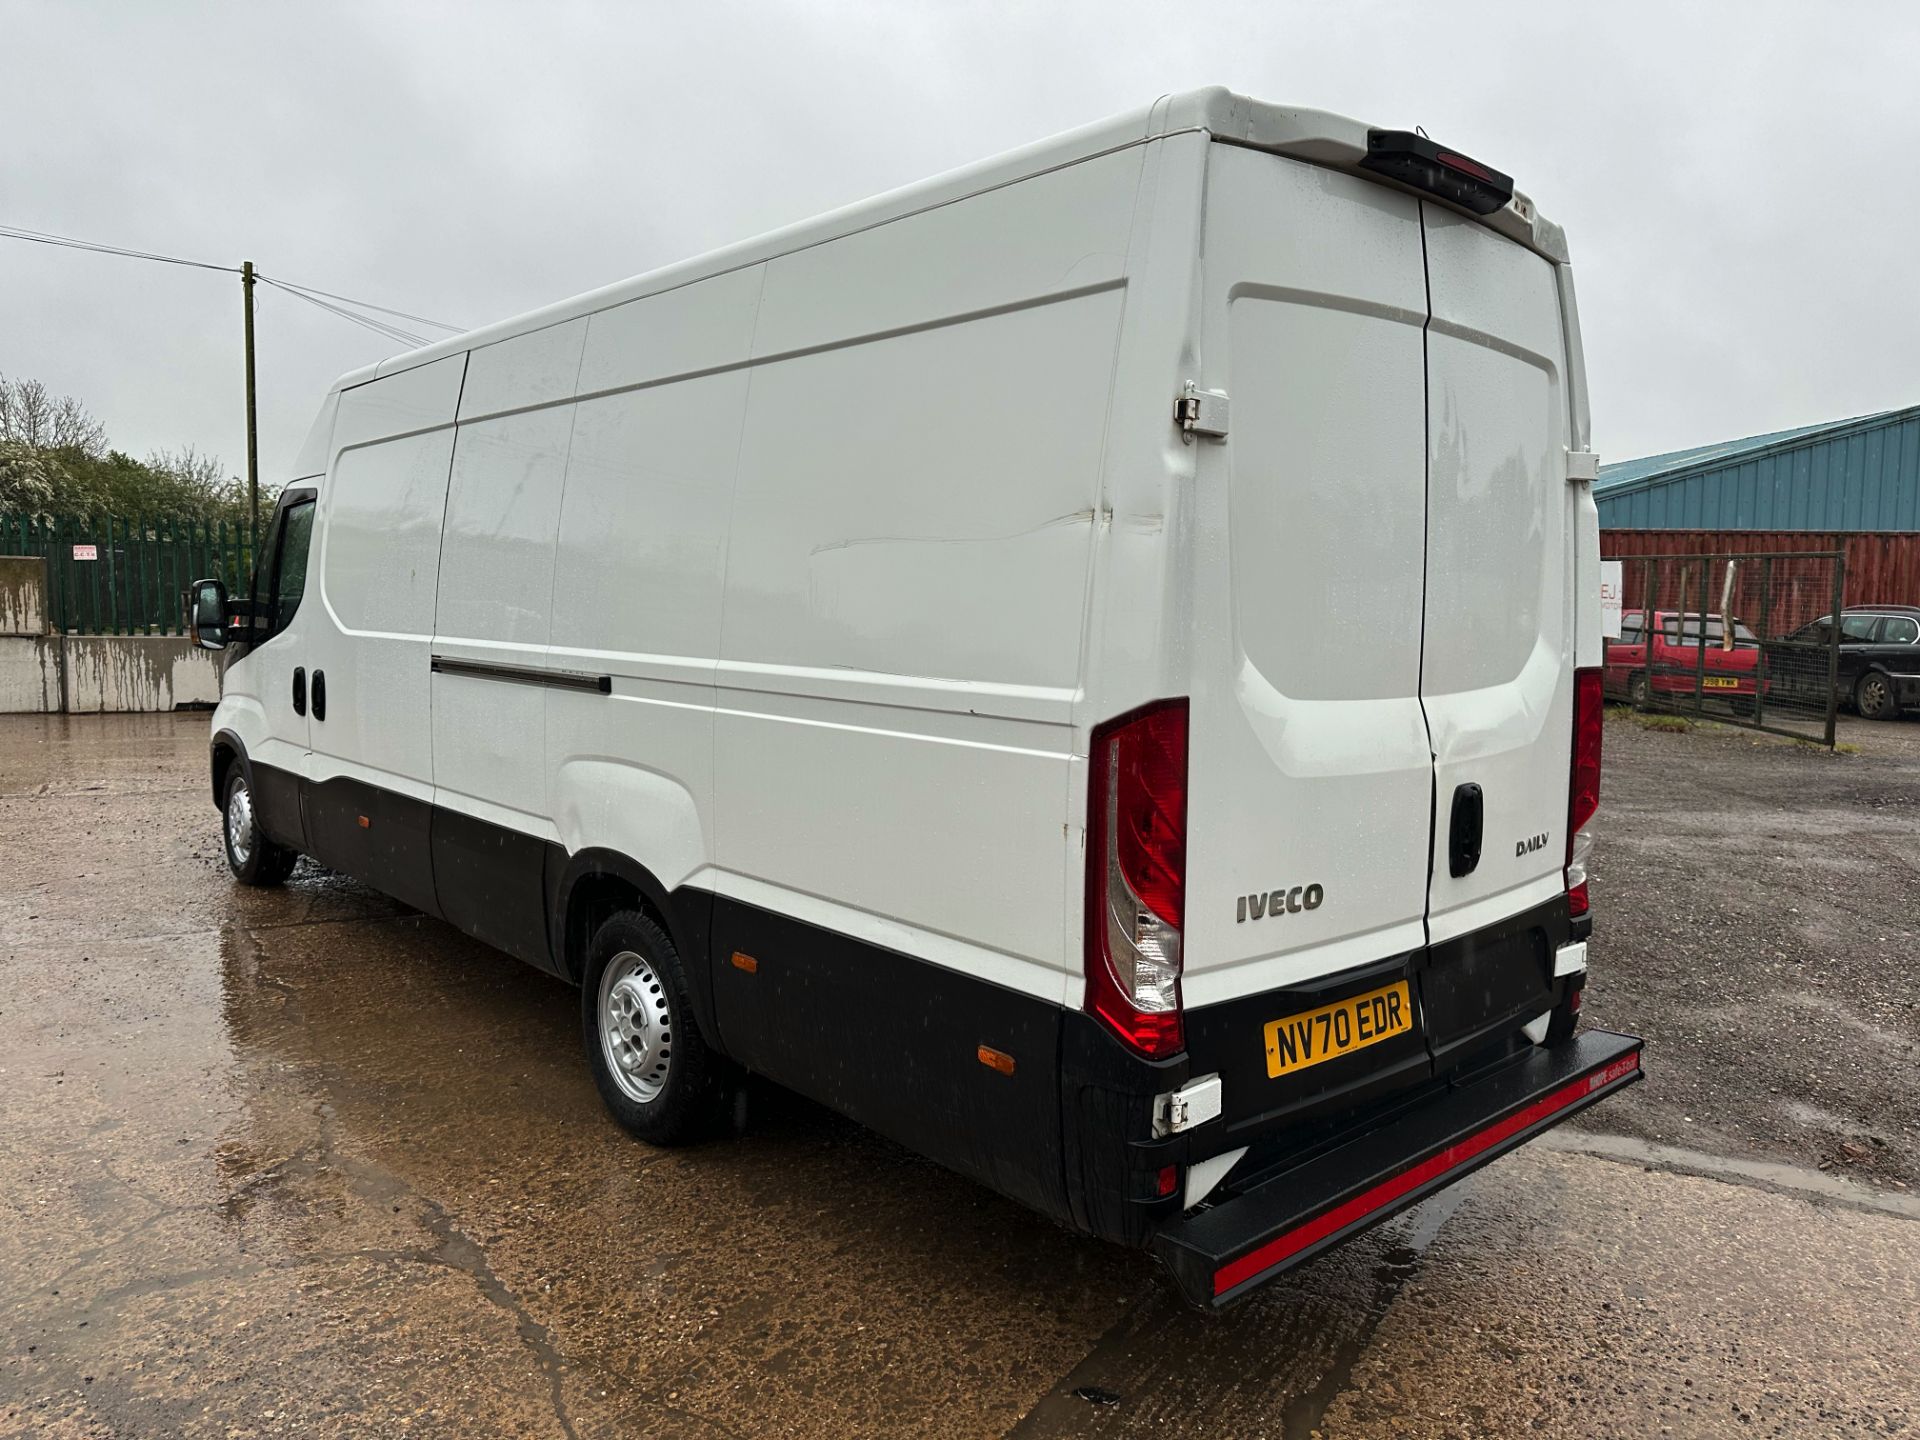 Iveco Daily 35-140 Long Wheel Base High Roof - 2021 Reg (New Shape) Only 85K Miles - Air Con - Look! - Image 7 of 27